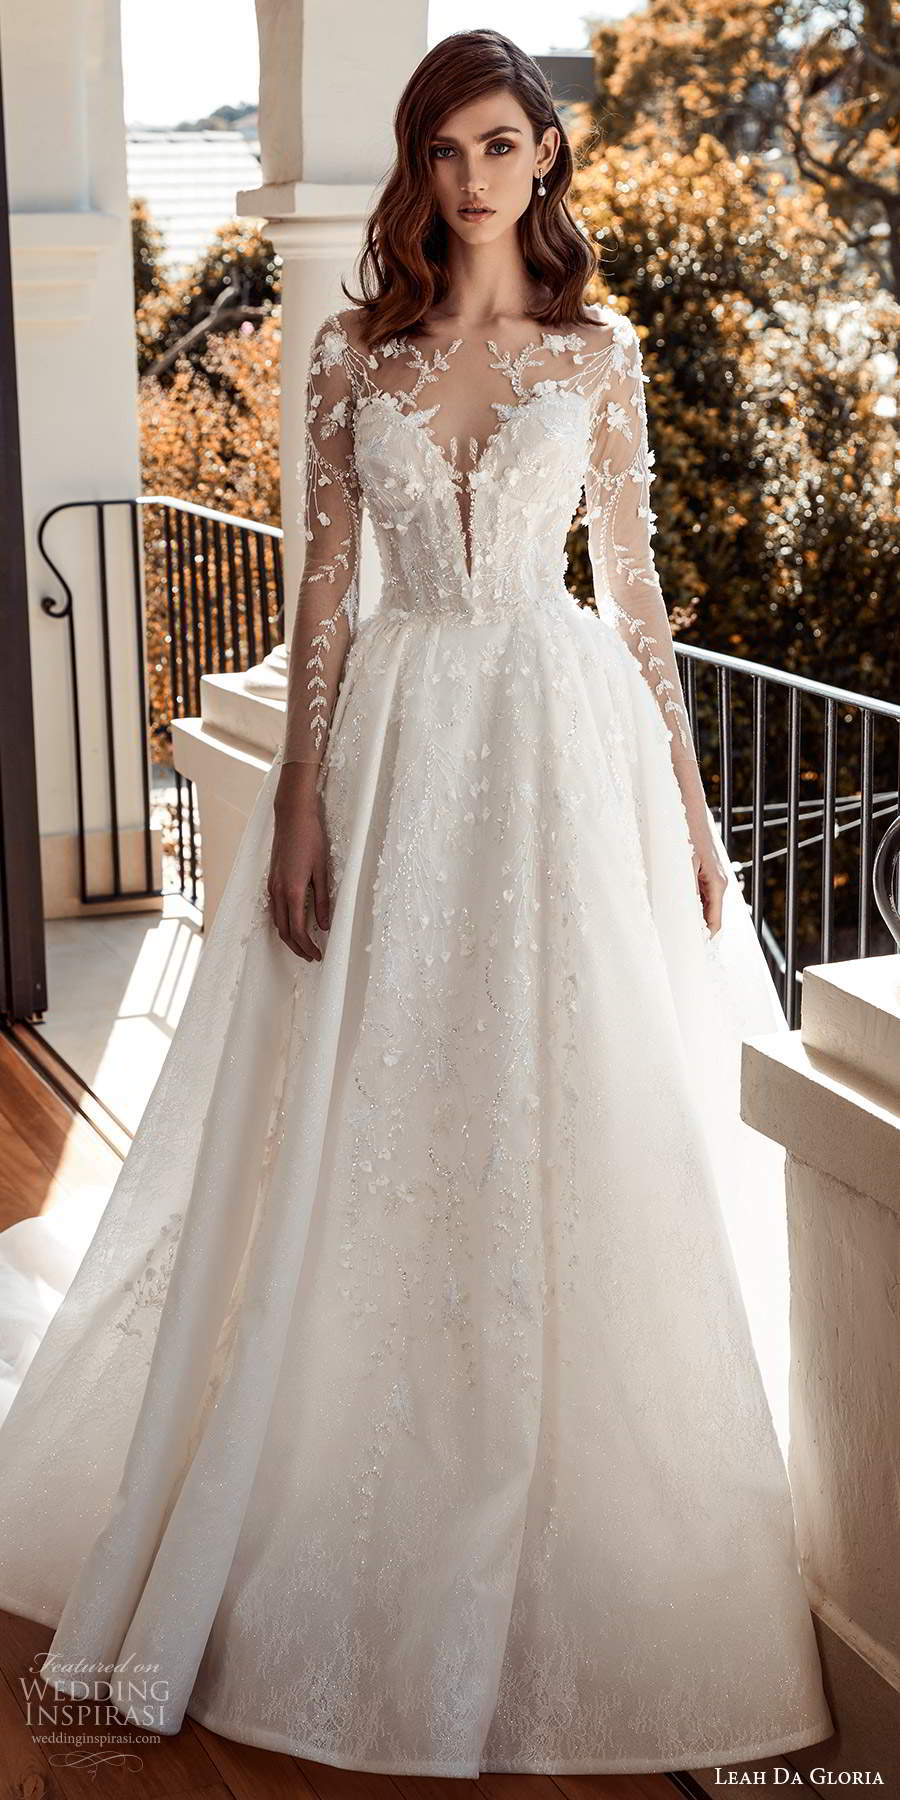 leah da gloria 2020 bridal couture illusion long sleeves sweetheart neckline fully embellished ball gown wedding dress chapel train 3 mv